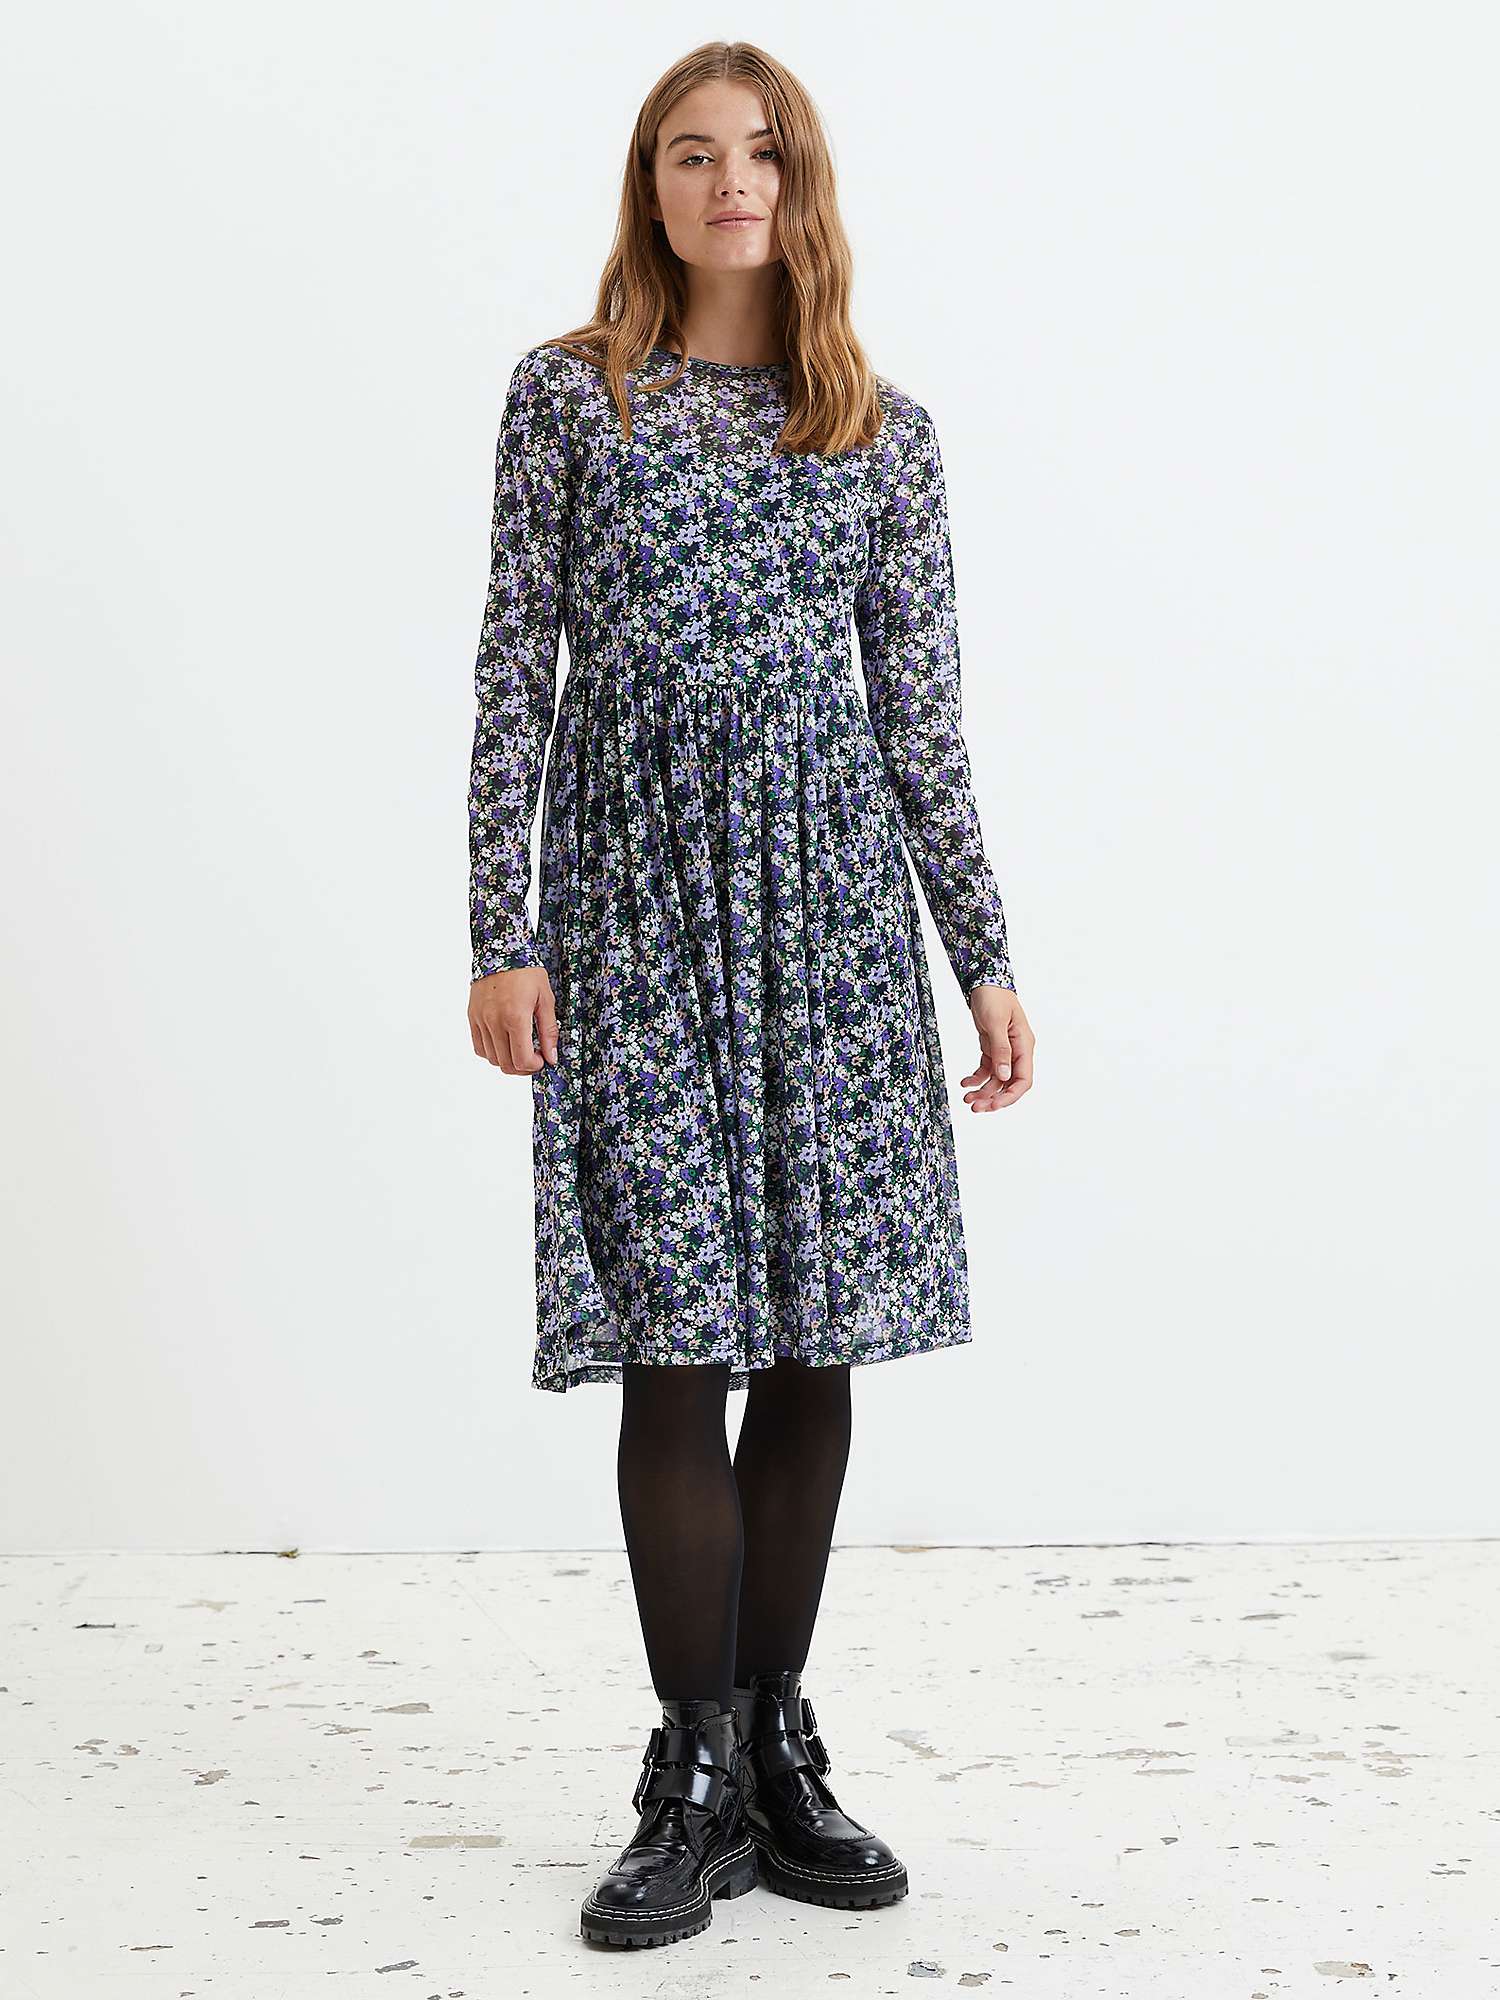 Buy Lollys Laundry Lydia Floral Print Dress, Multi Online at johnlewis.com